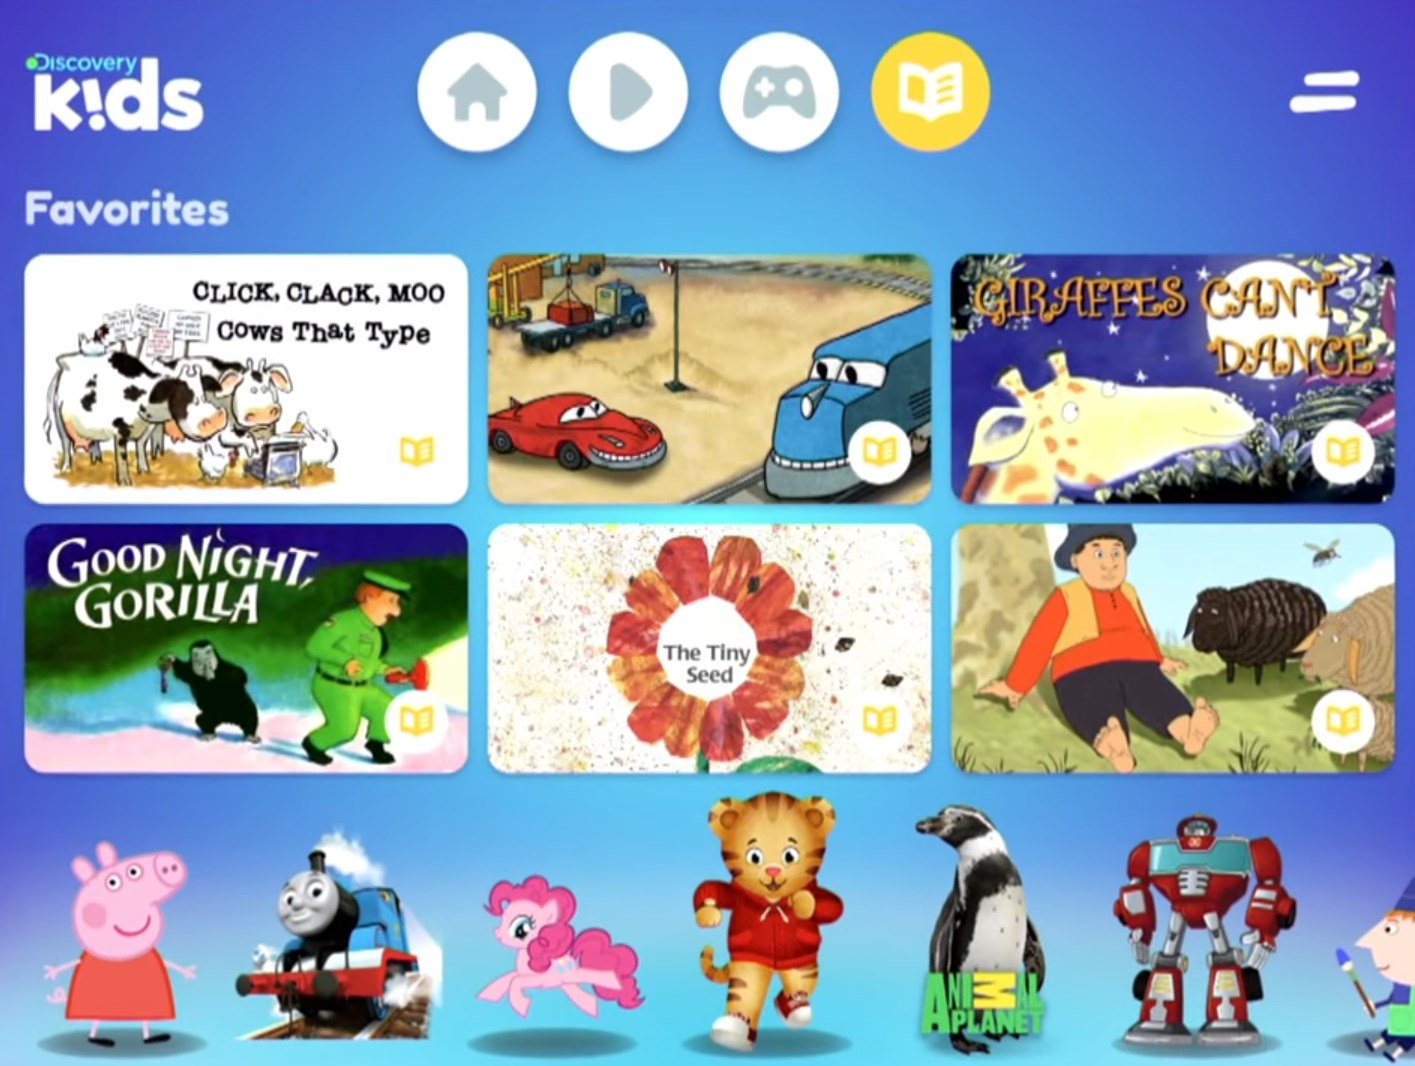 Discovery Kids 1 13 0 Download For Android Apk Free